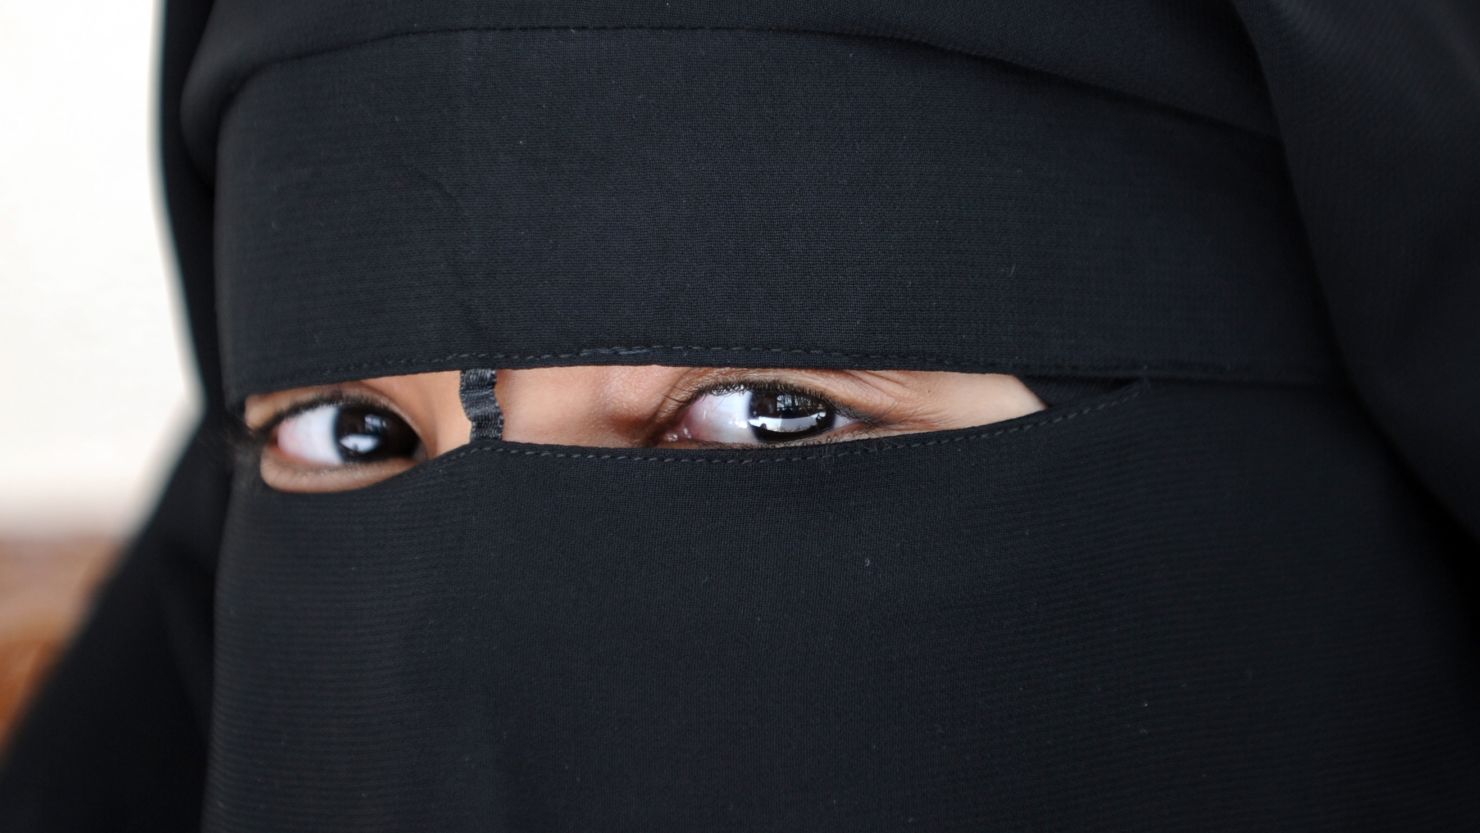 Far-right parties in several European nations have called for a ban on the full-face veil.